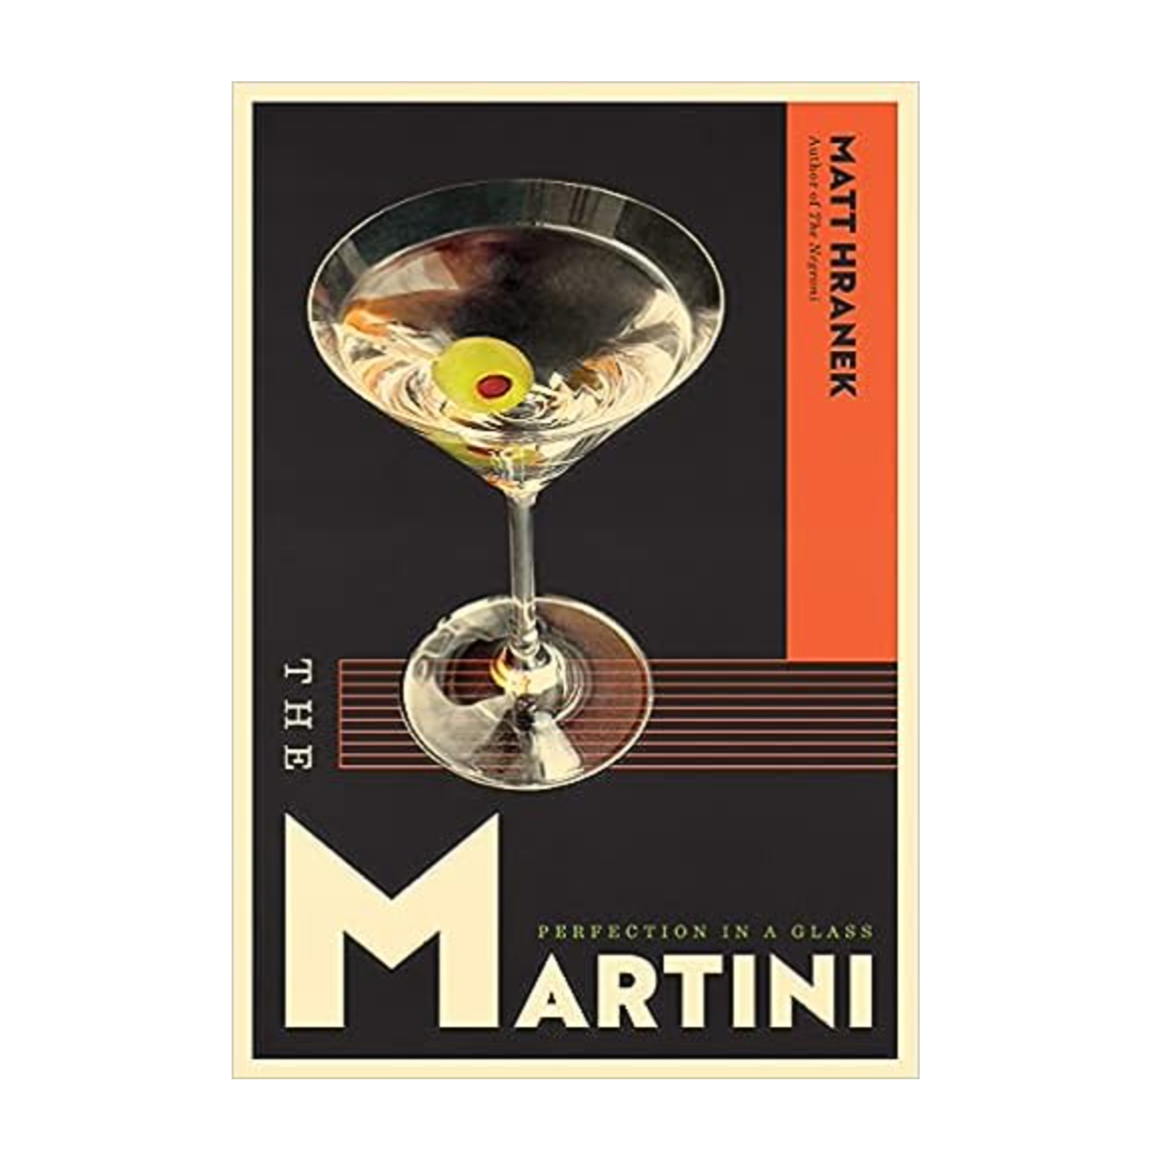 Martini: Perfection in a Glass front cover